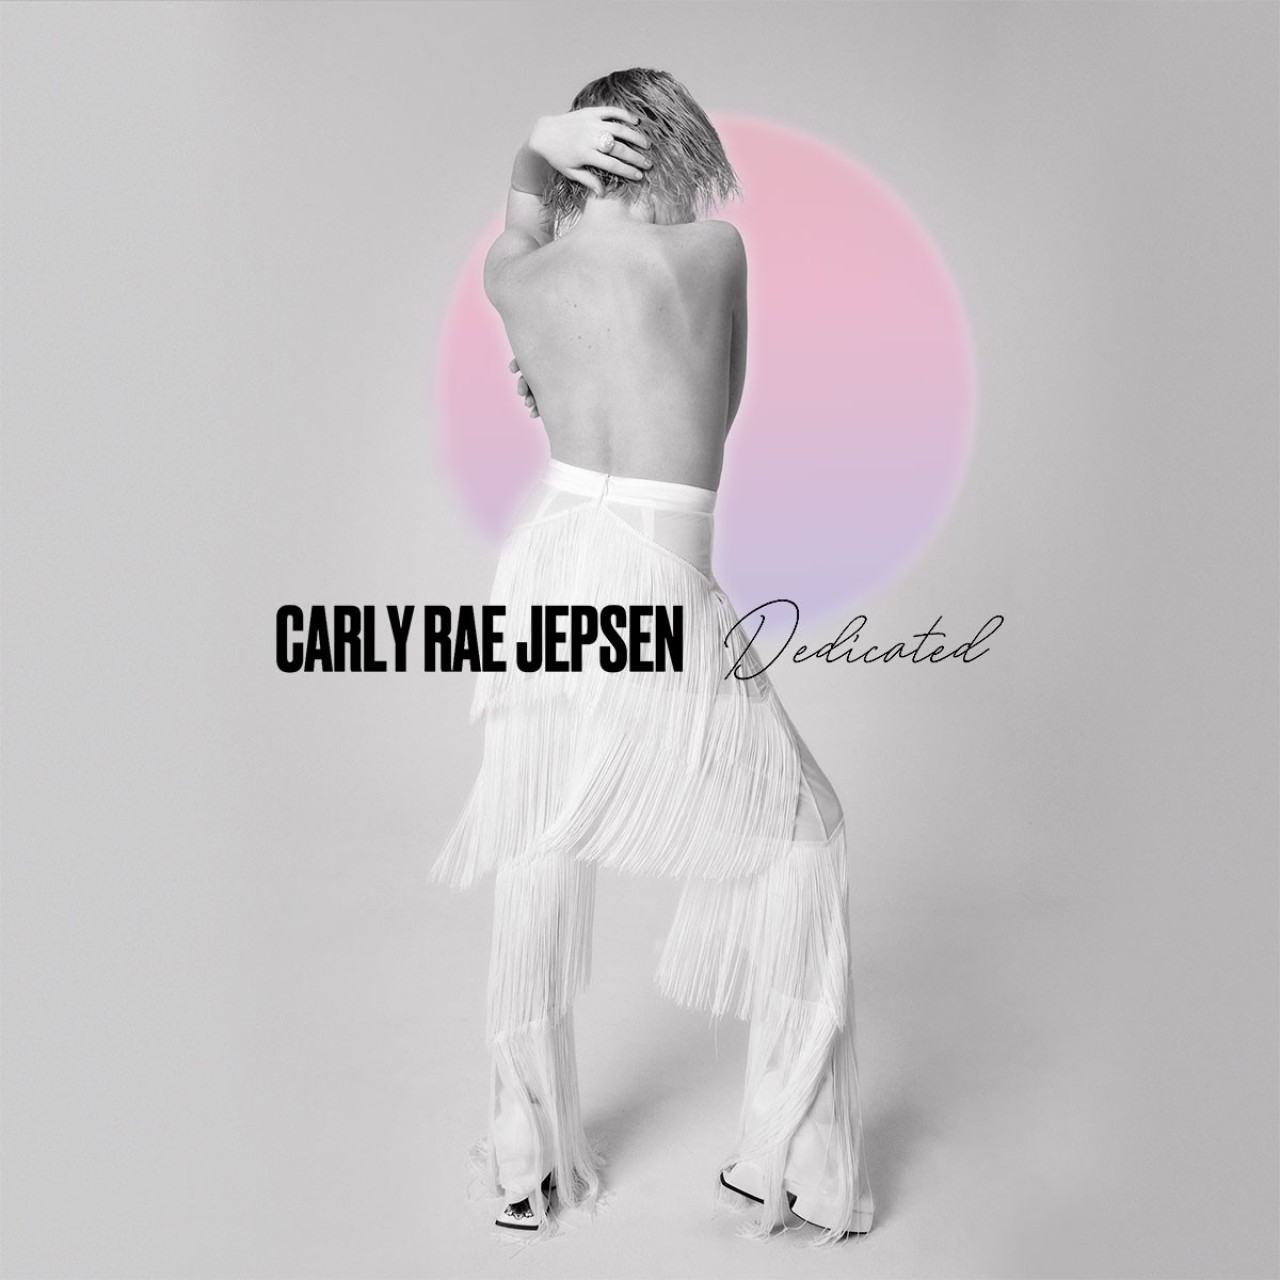 Carly Rae Jepsen S Dedicated Album Review Canadian Call Me Maybe Singer Songwriter Back With More Catchy Pop Tunes Yp South China Morning Post